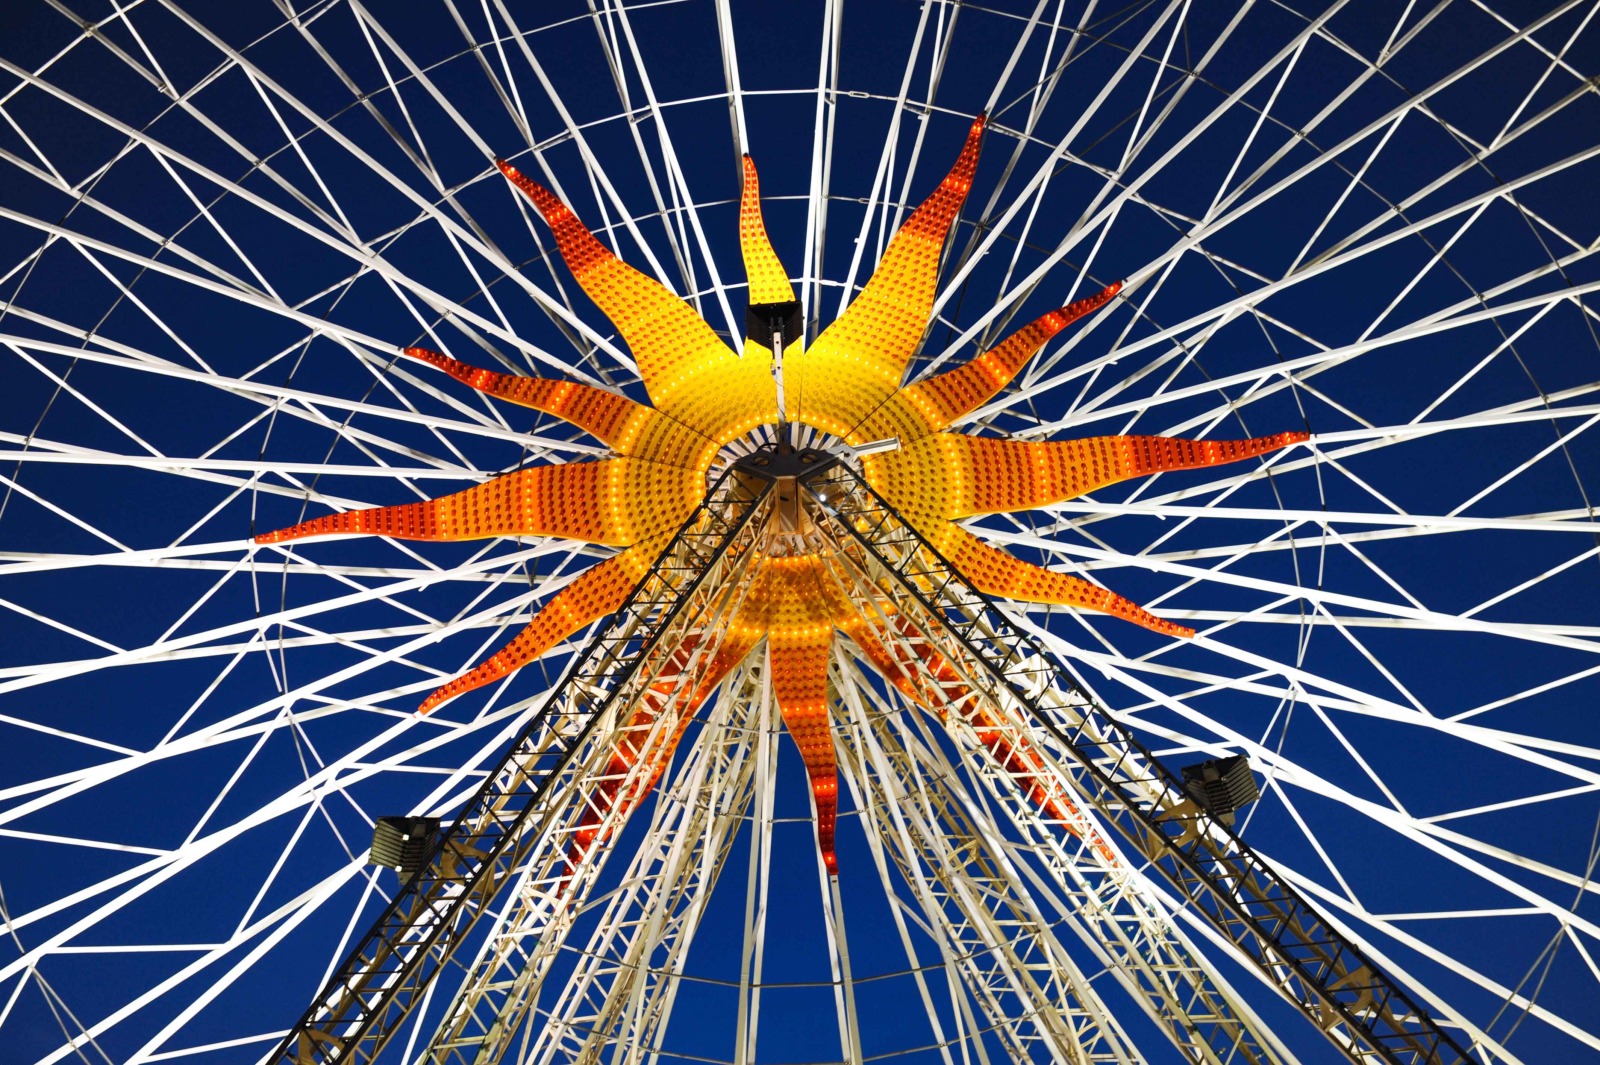 The Ferris wheel in Nice © Cayambe - licence [CC BY-SA 3.0] from Wikimedia Commons